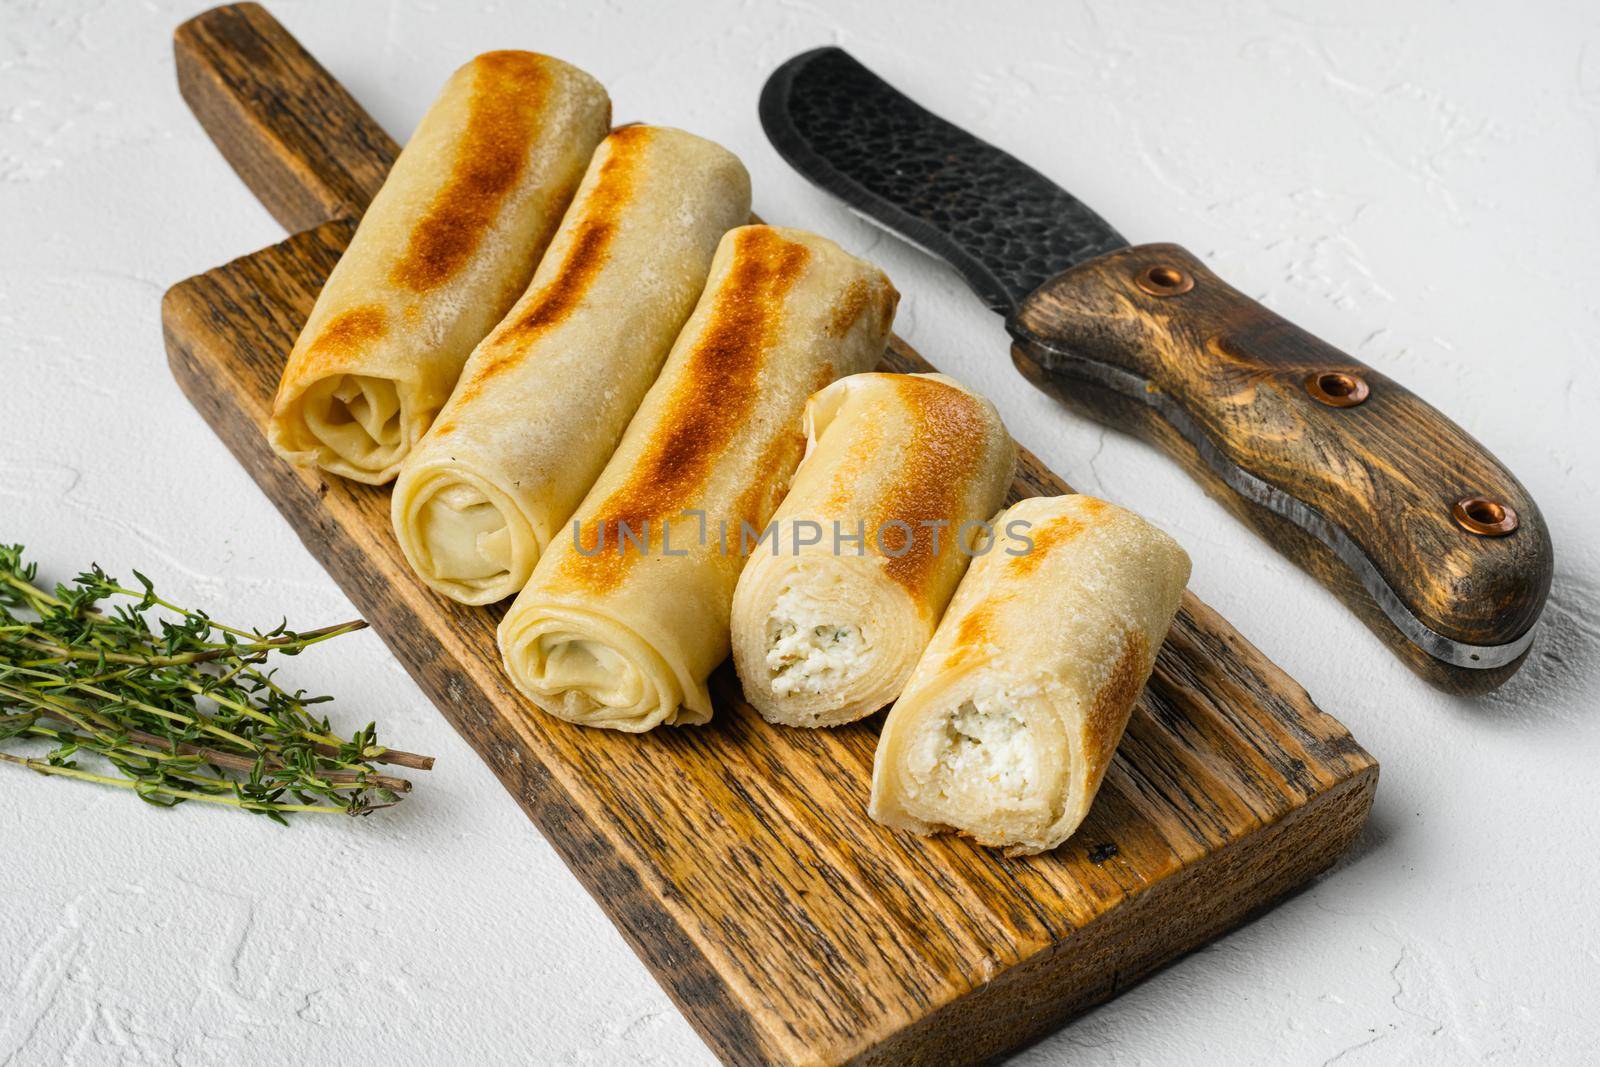 Fried georgian crepes stuffed with suluguni on white stone table background by Ilianesolenyi